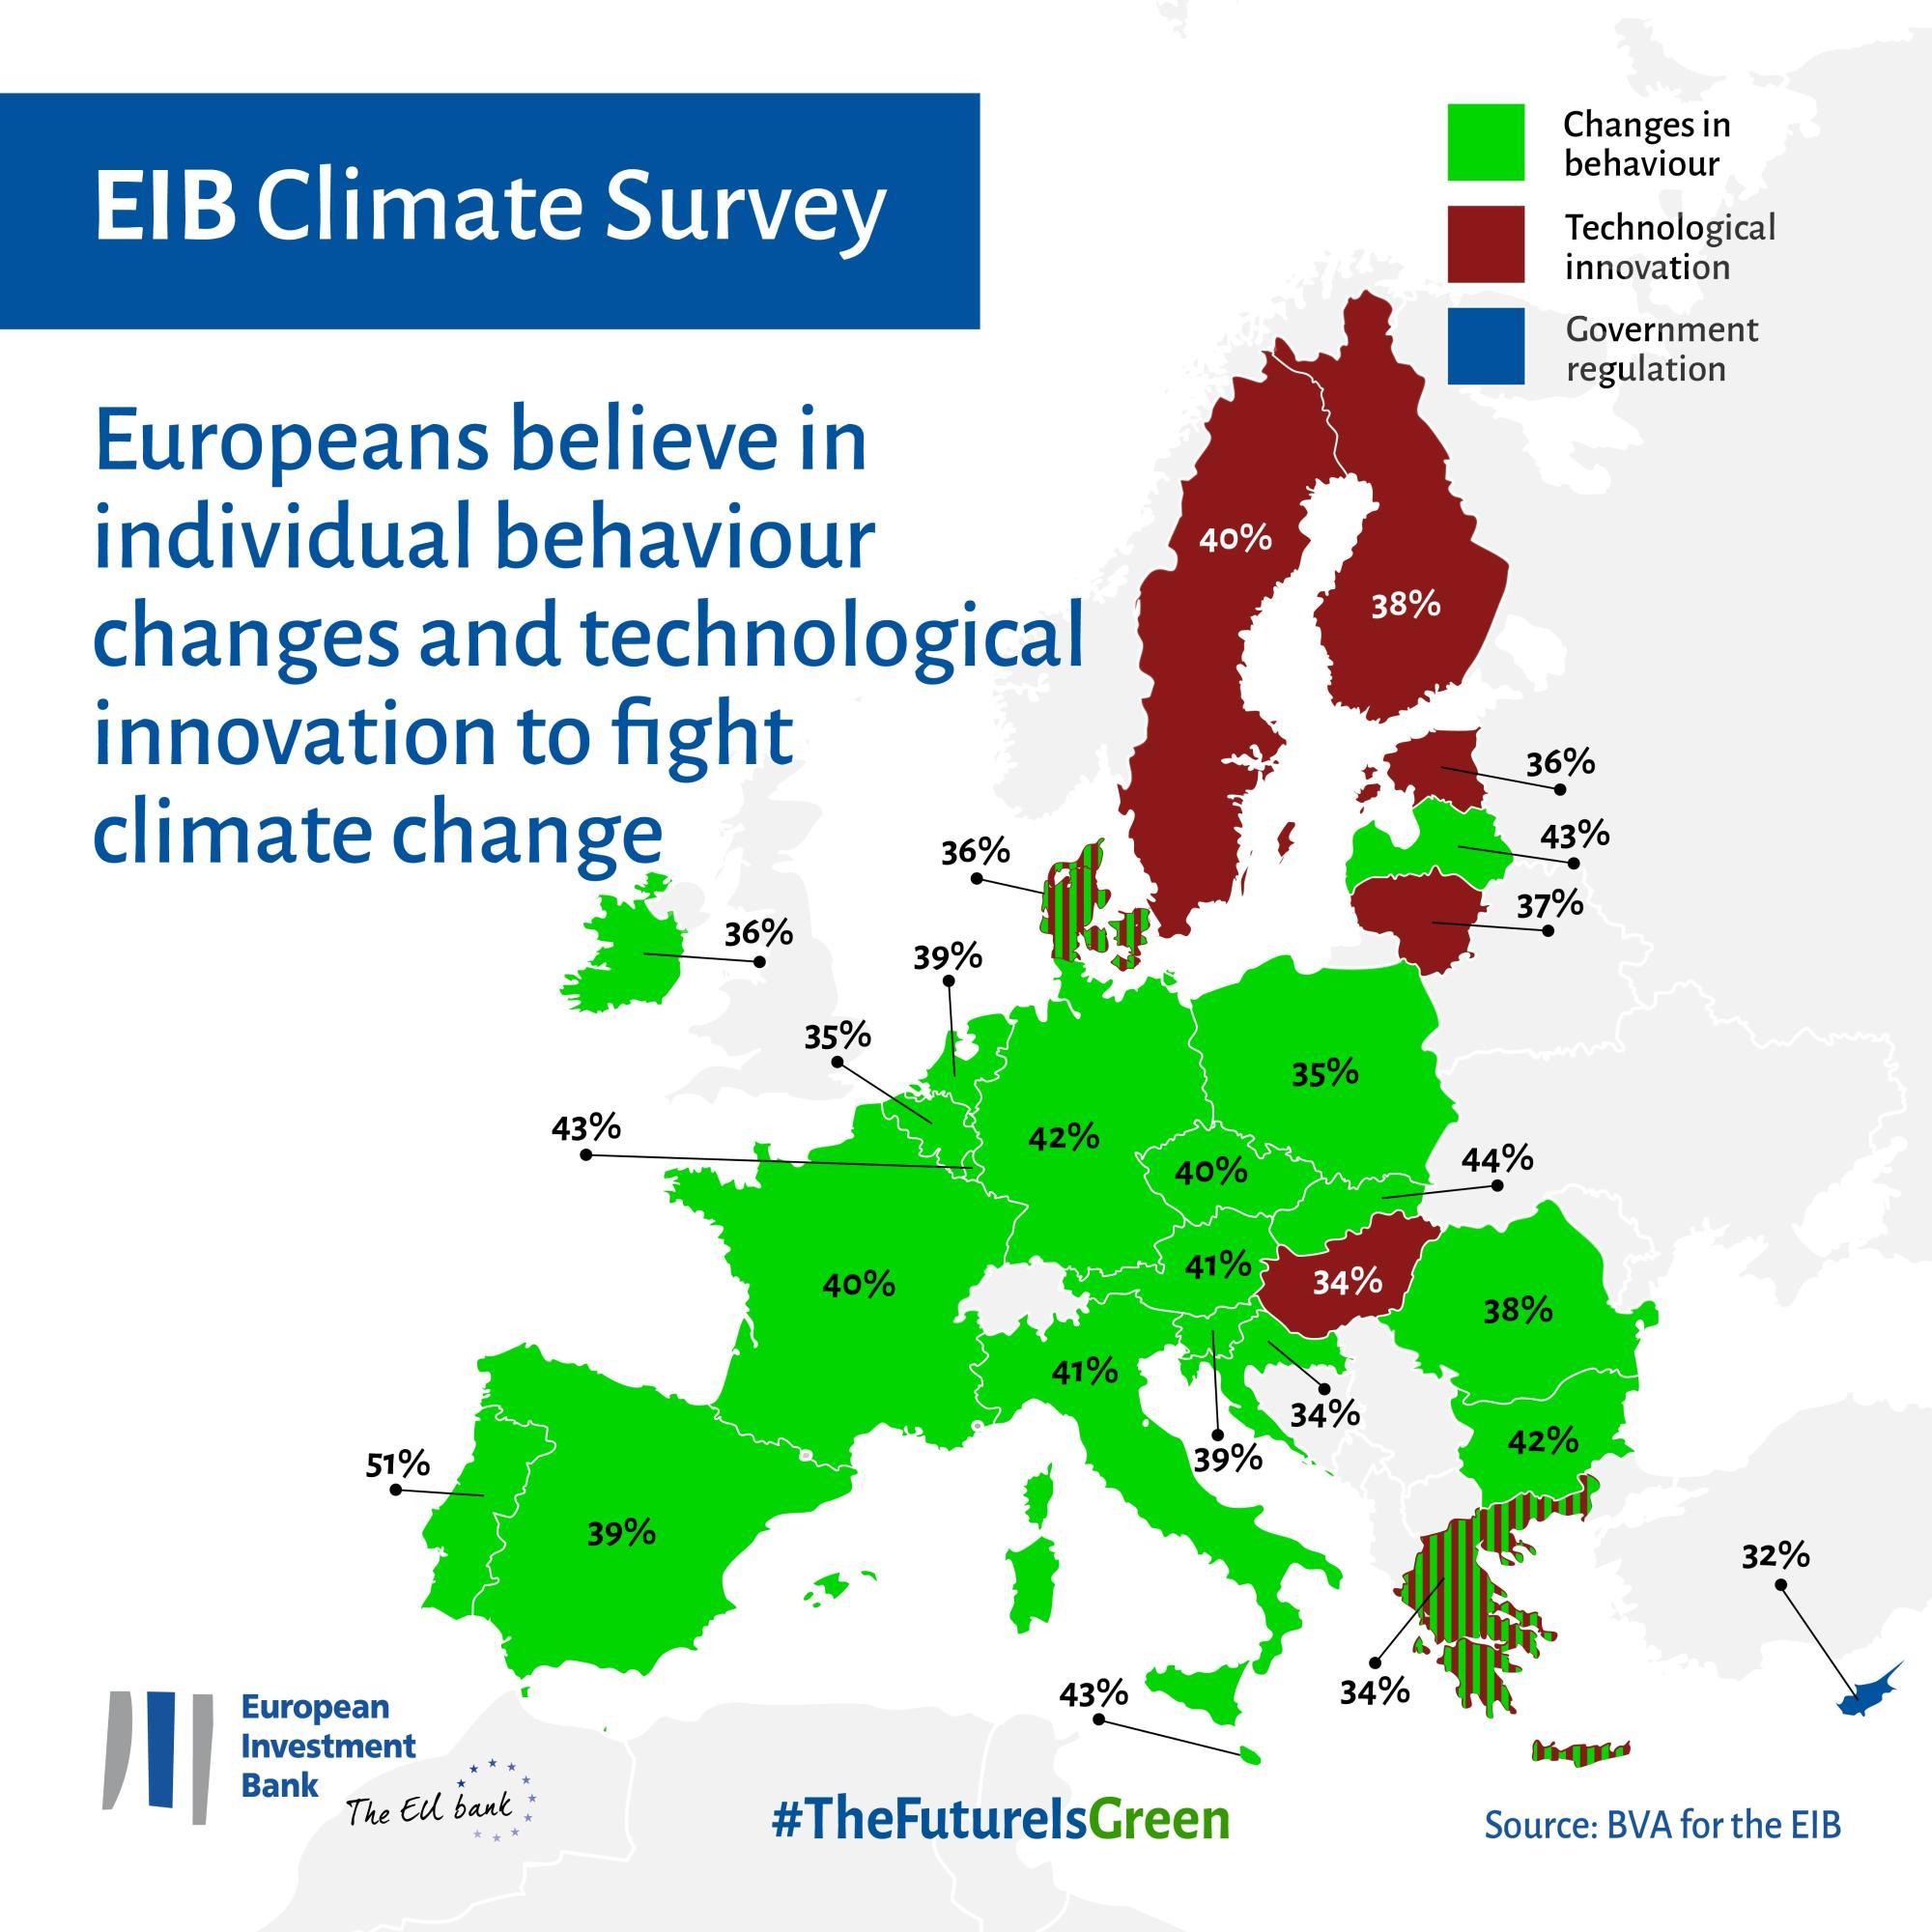 Europeans believe in individual behaviour changes and technological innovation to fight climate change